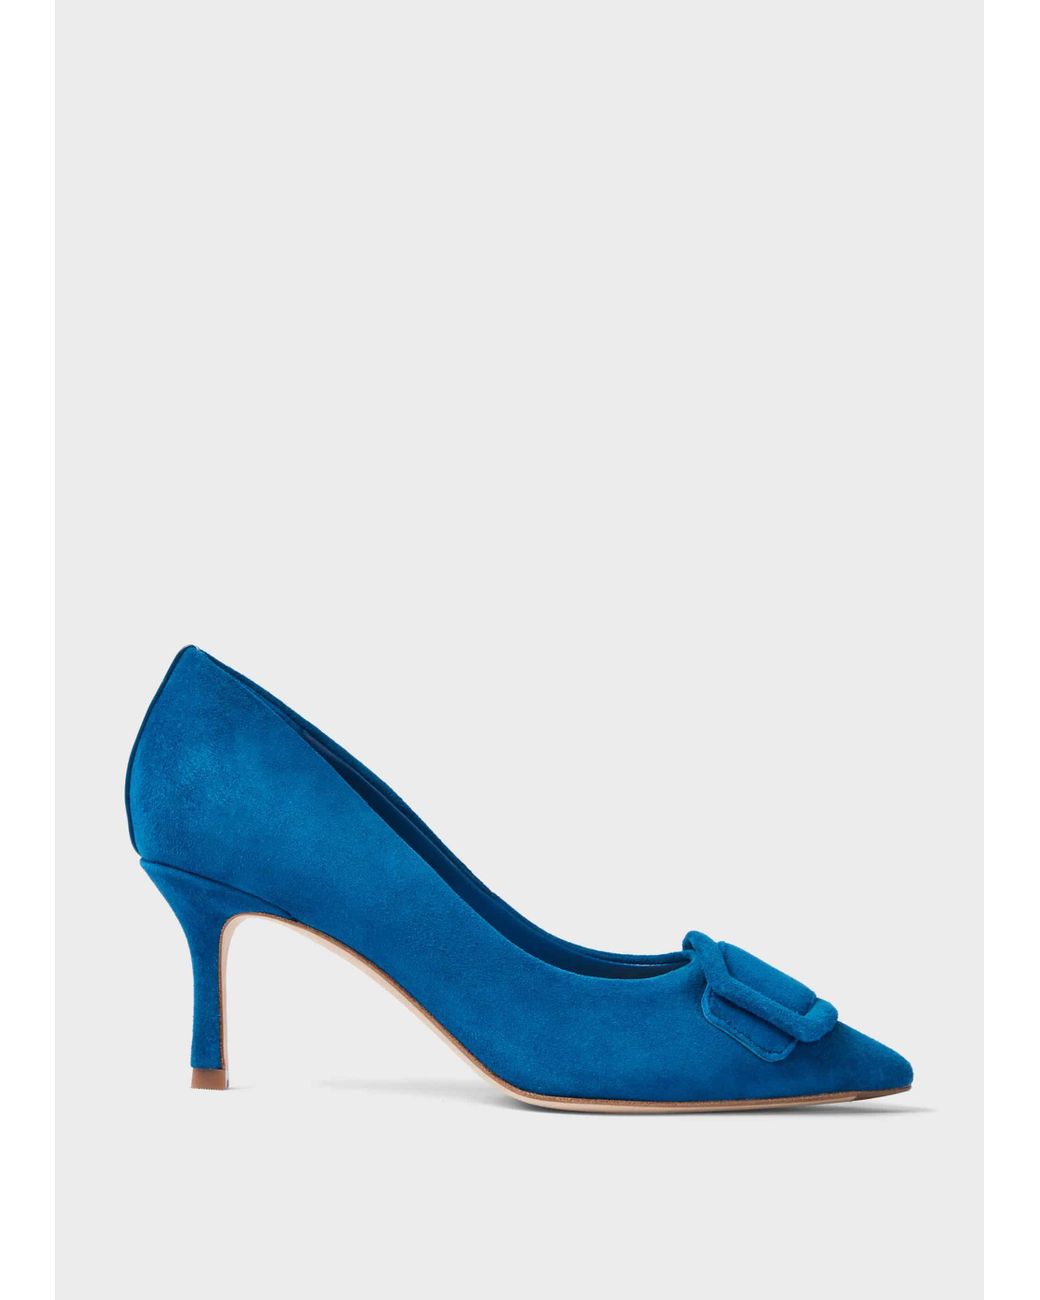 Hobbs Alison Suede Stiletto Court Shoes in Blue | Lyst